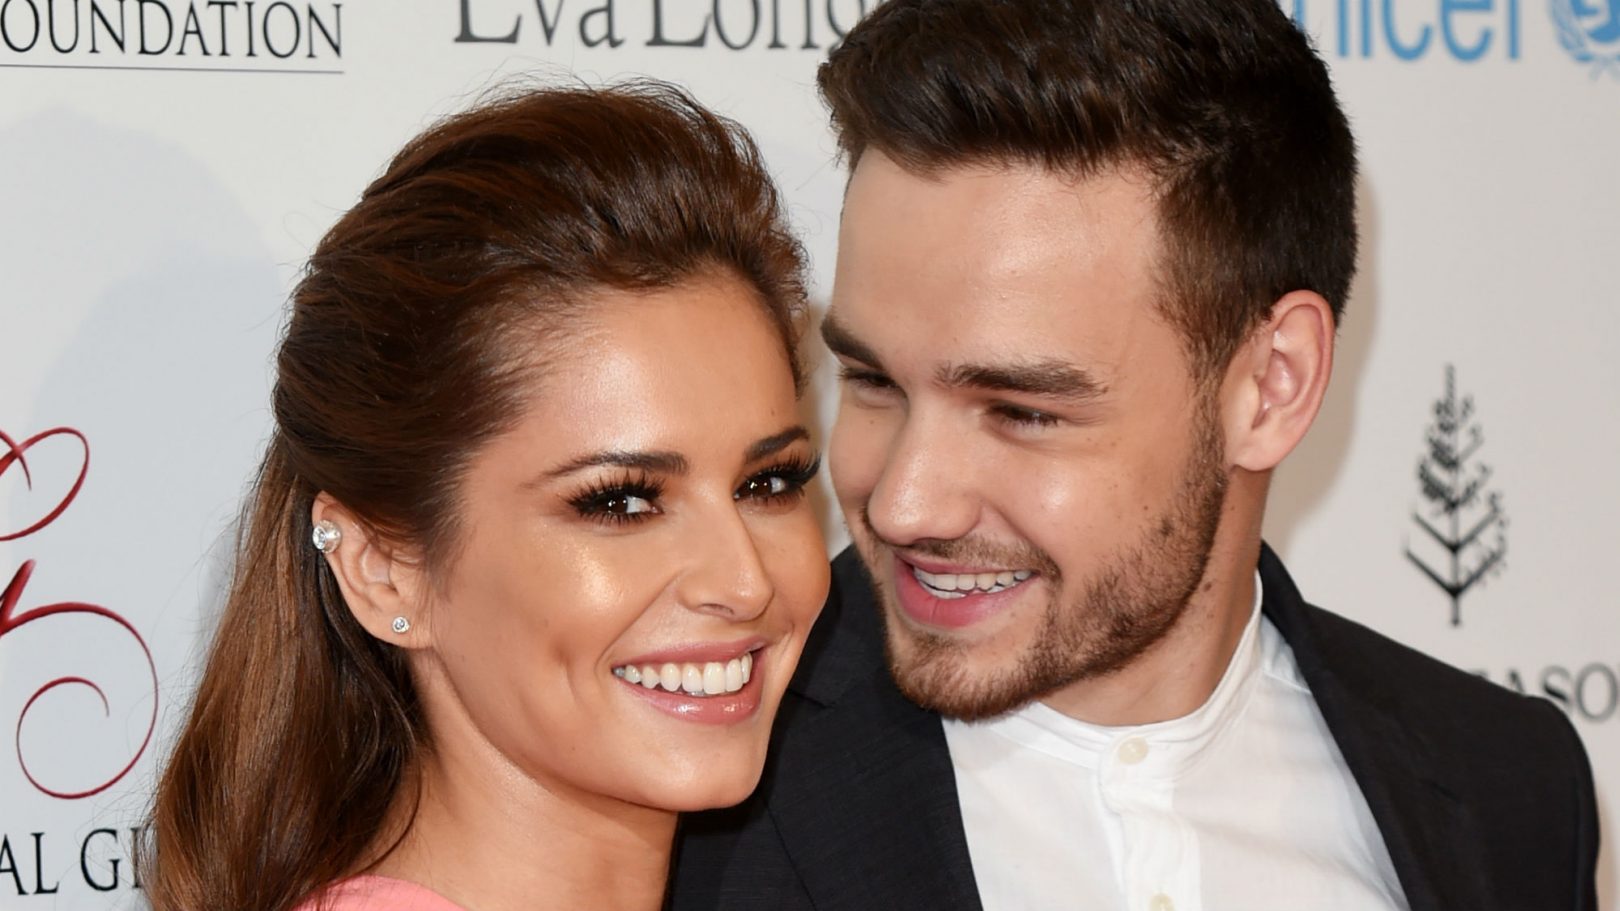 When did Liam Payne Get Married?